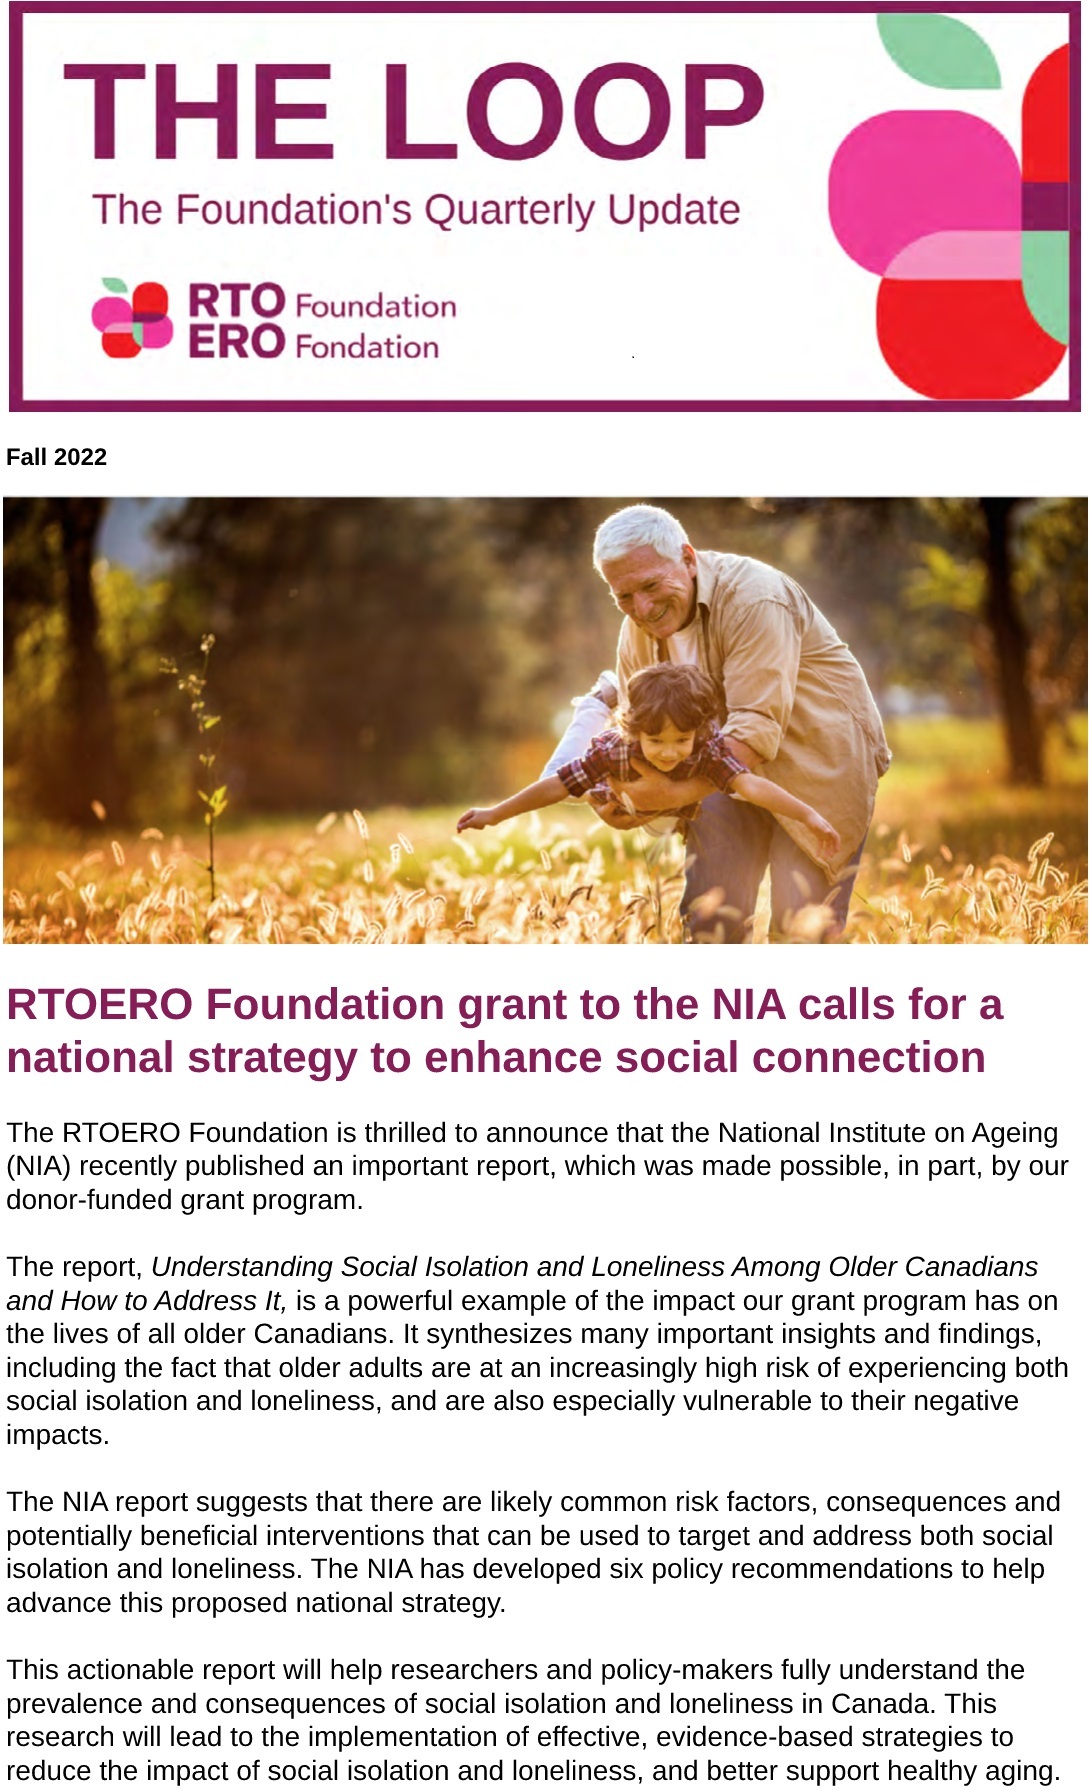 RTOERO Foundation grant to the NIA calls for a national strategy to enhance social connection